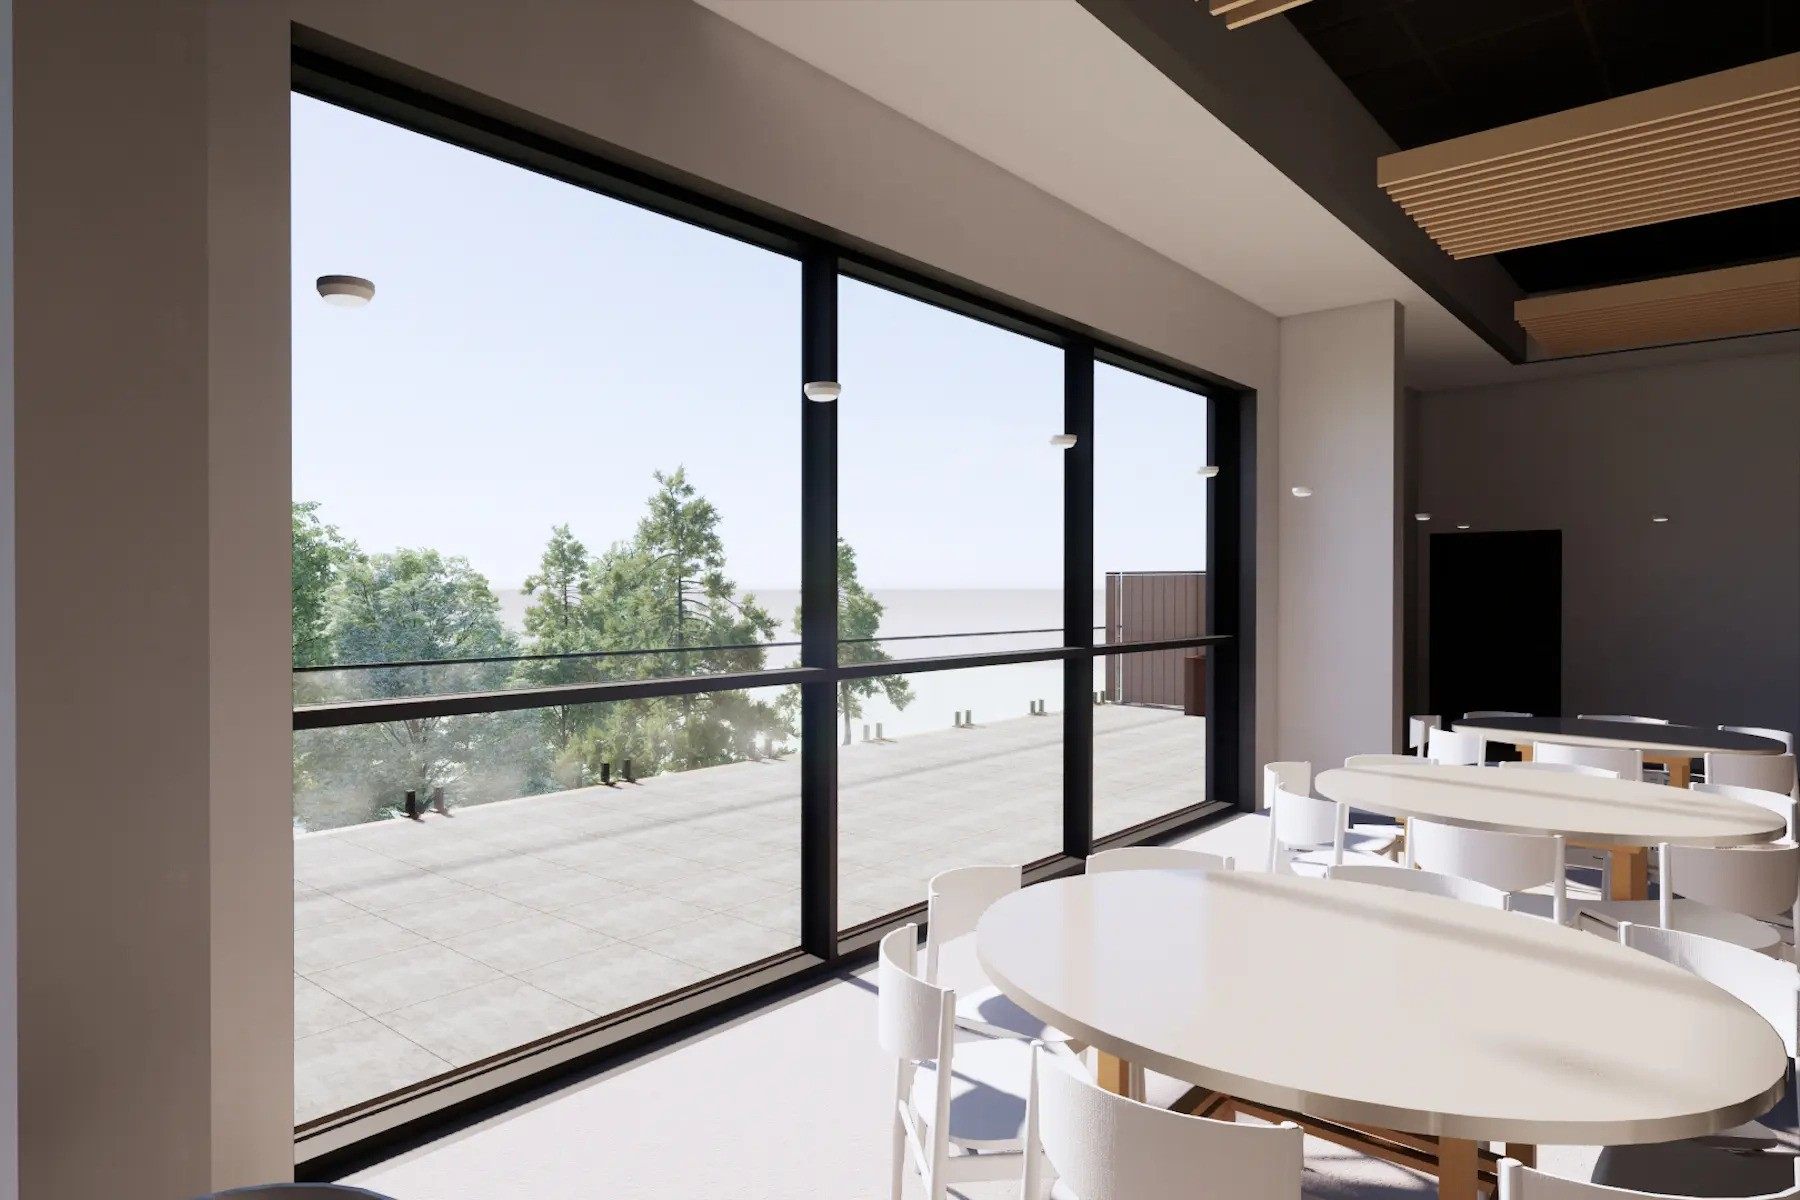 A render of the Multipurpose Event Room and Upper Terrace. Round tables and chairs line the room, which features an expansive window and door to the Upper Terrace with west-facing views of Little Lake and the Lakefront Campus.